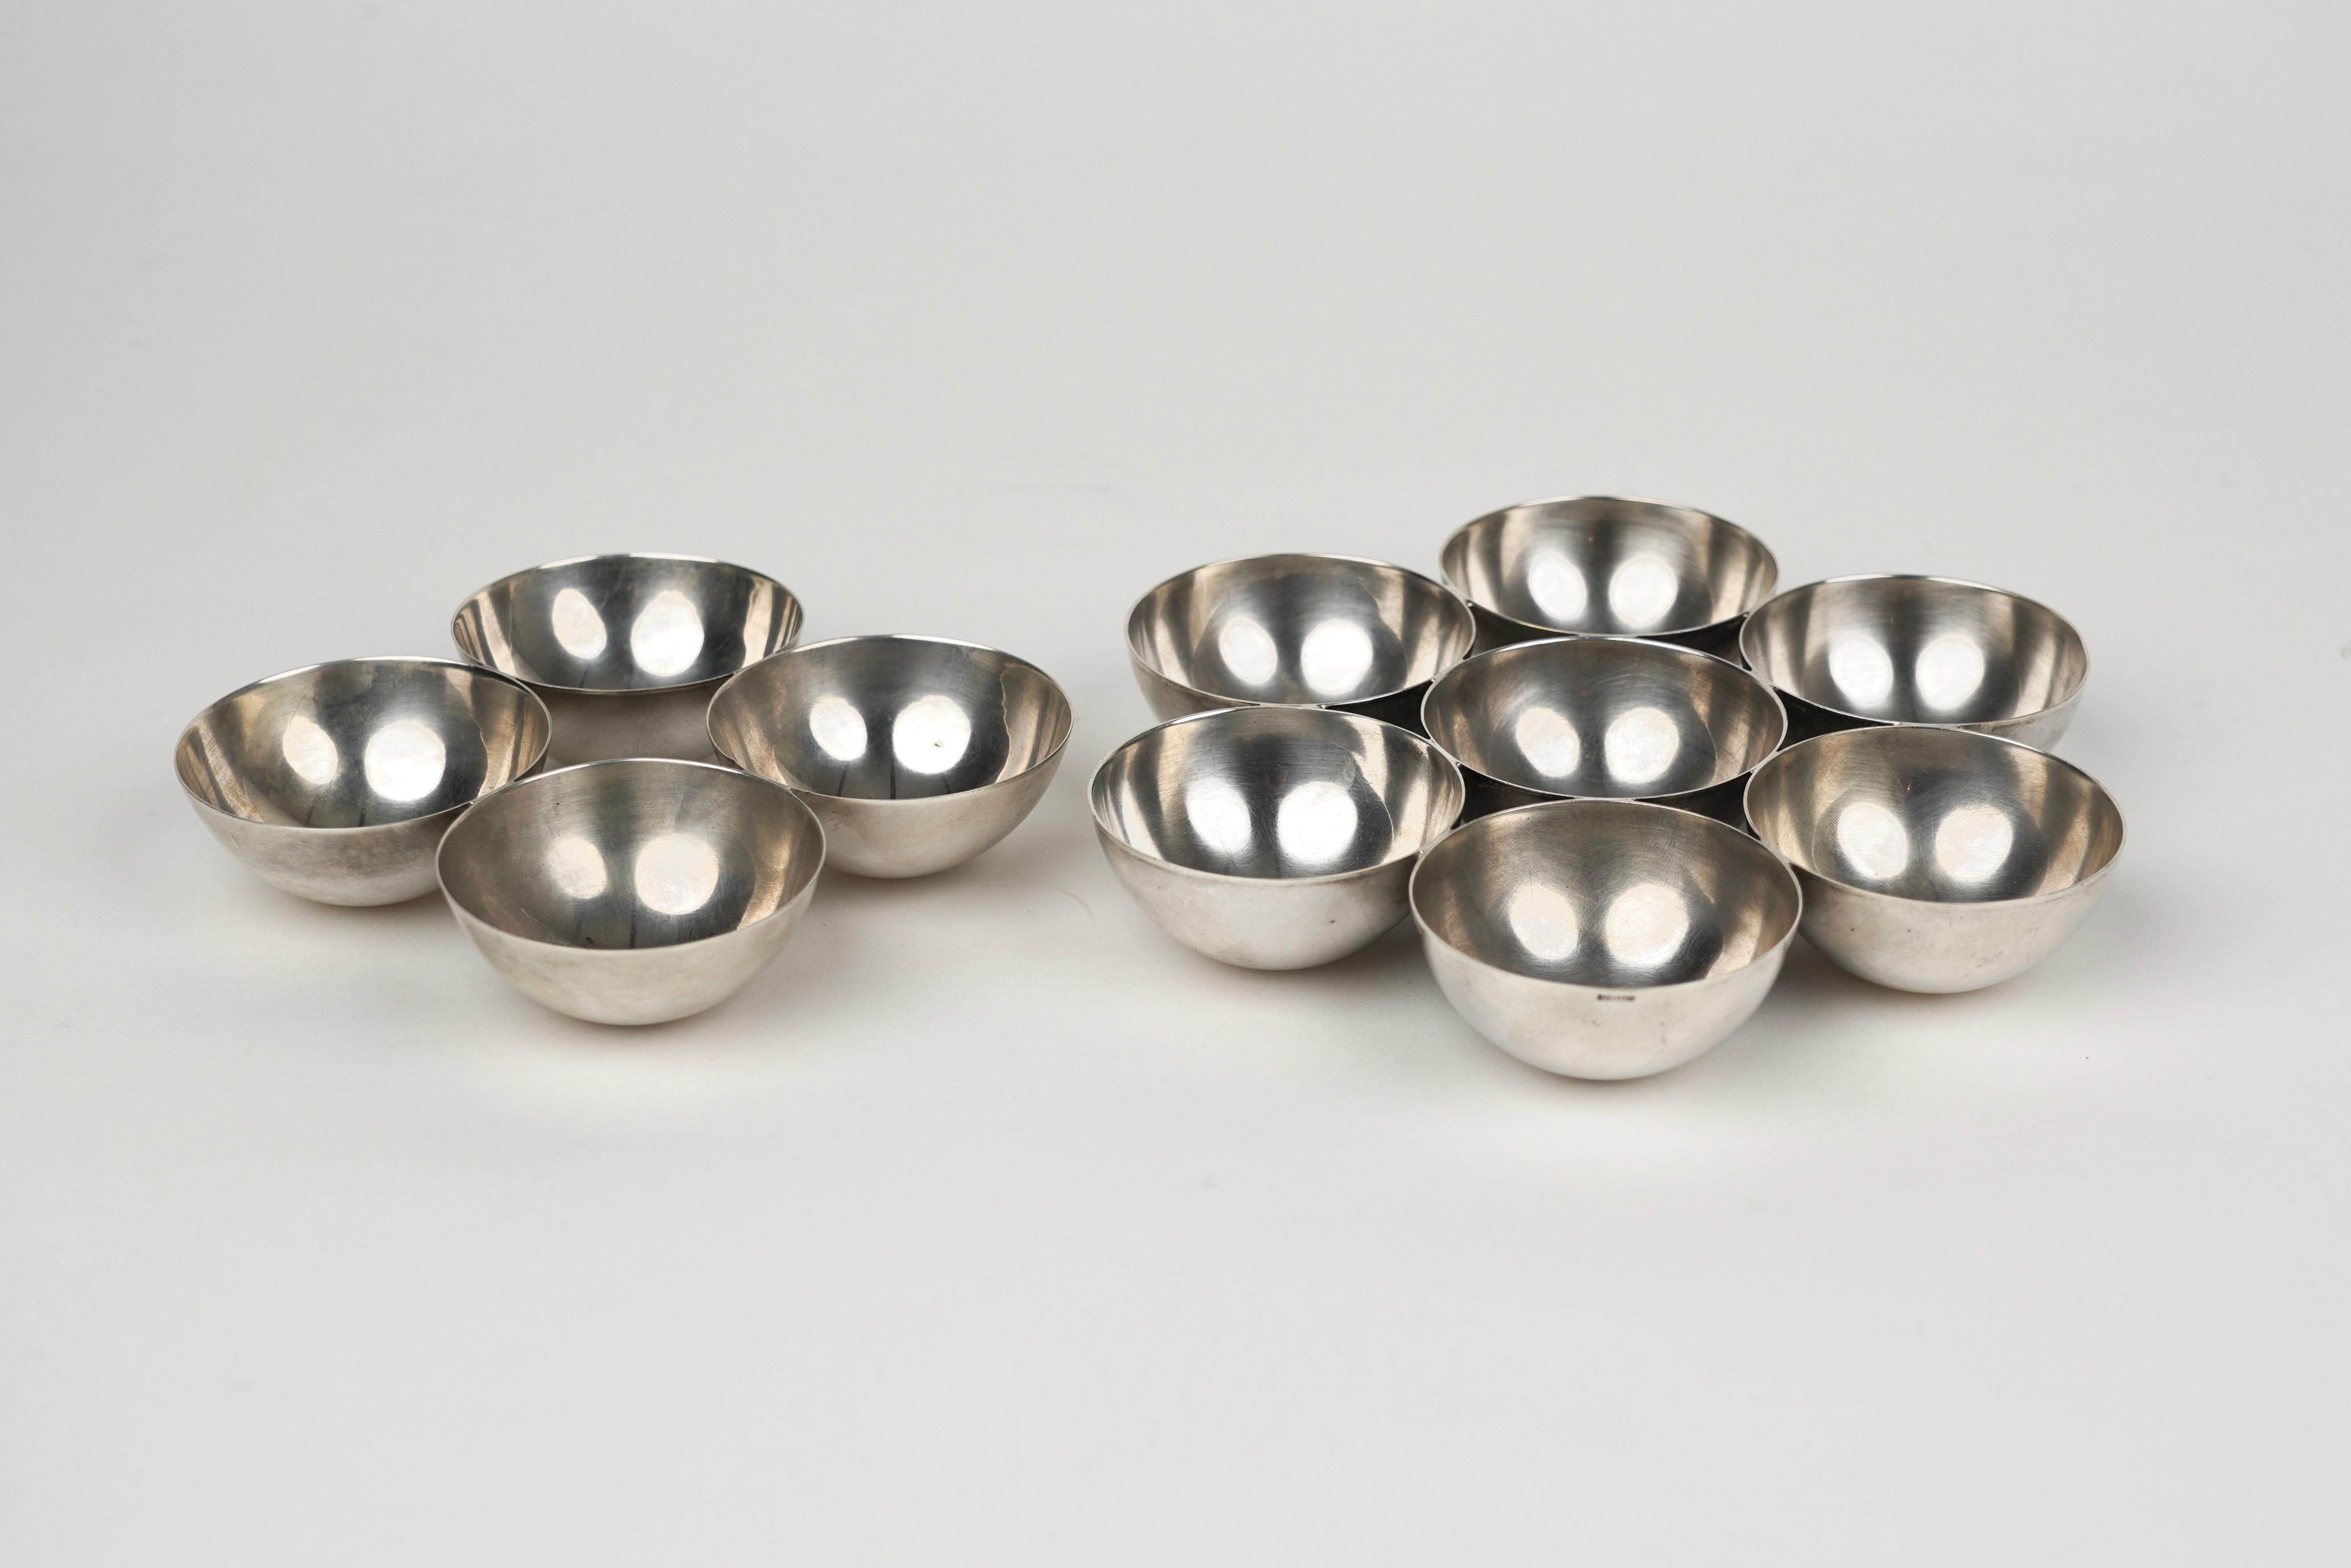 Pair of bowls, one composed of 7 bowls and the other of 4 bowls, by Sabattini. Made in Italy in the 1970s.

Dimensions:
- First 7: diameter 19.5 cm, height 3 cm. 
- Other 4: width 13 cm, height 3 cm, depth 13 cm. 

Both pairs still have the